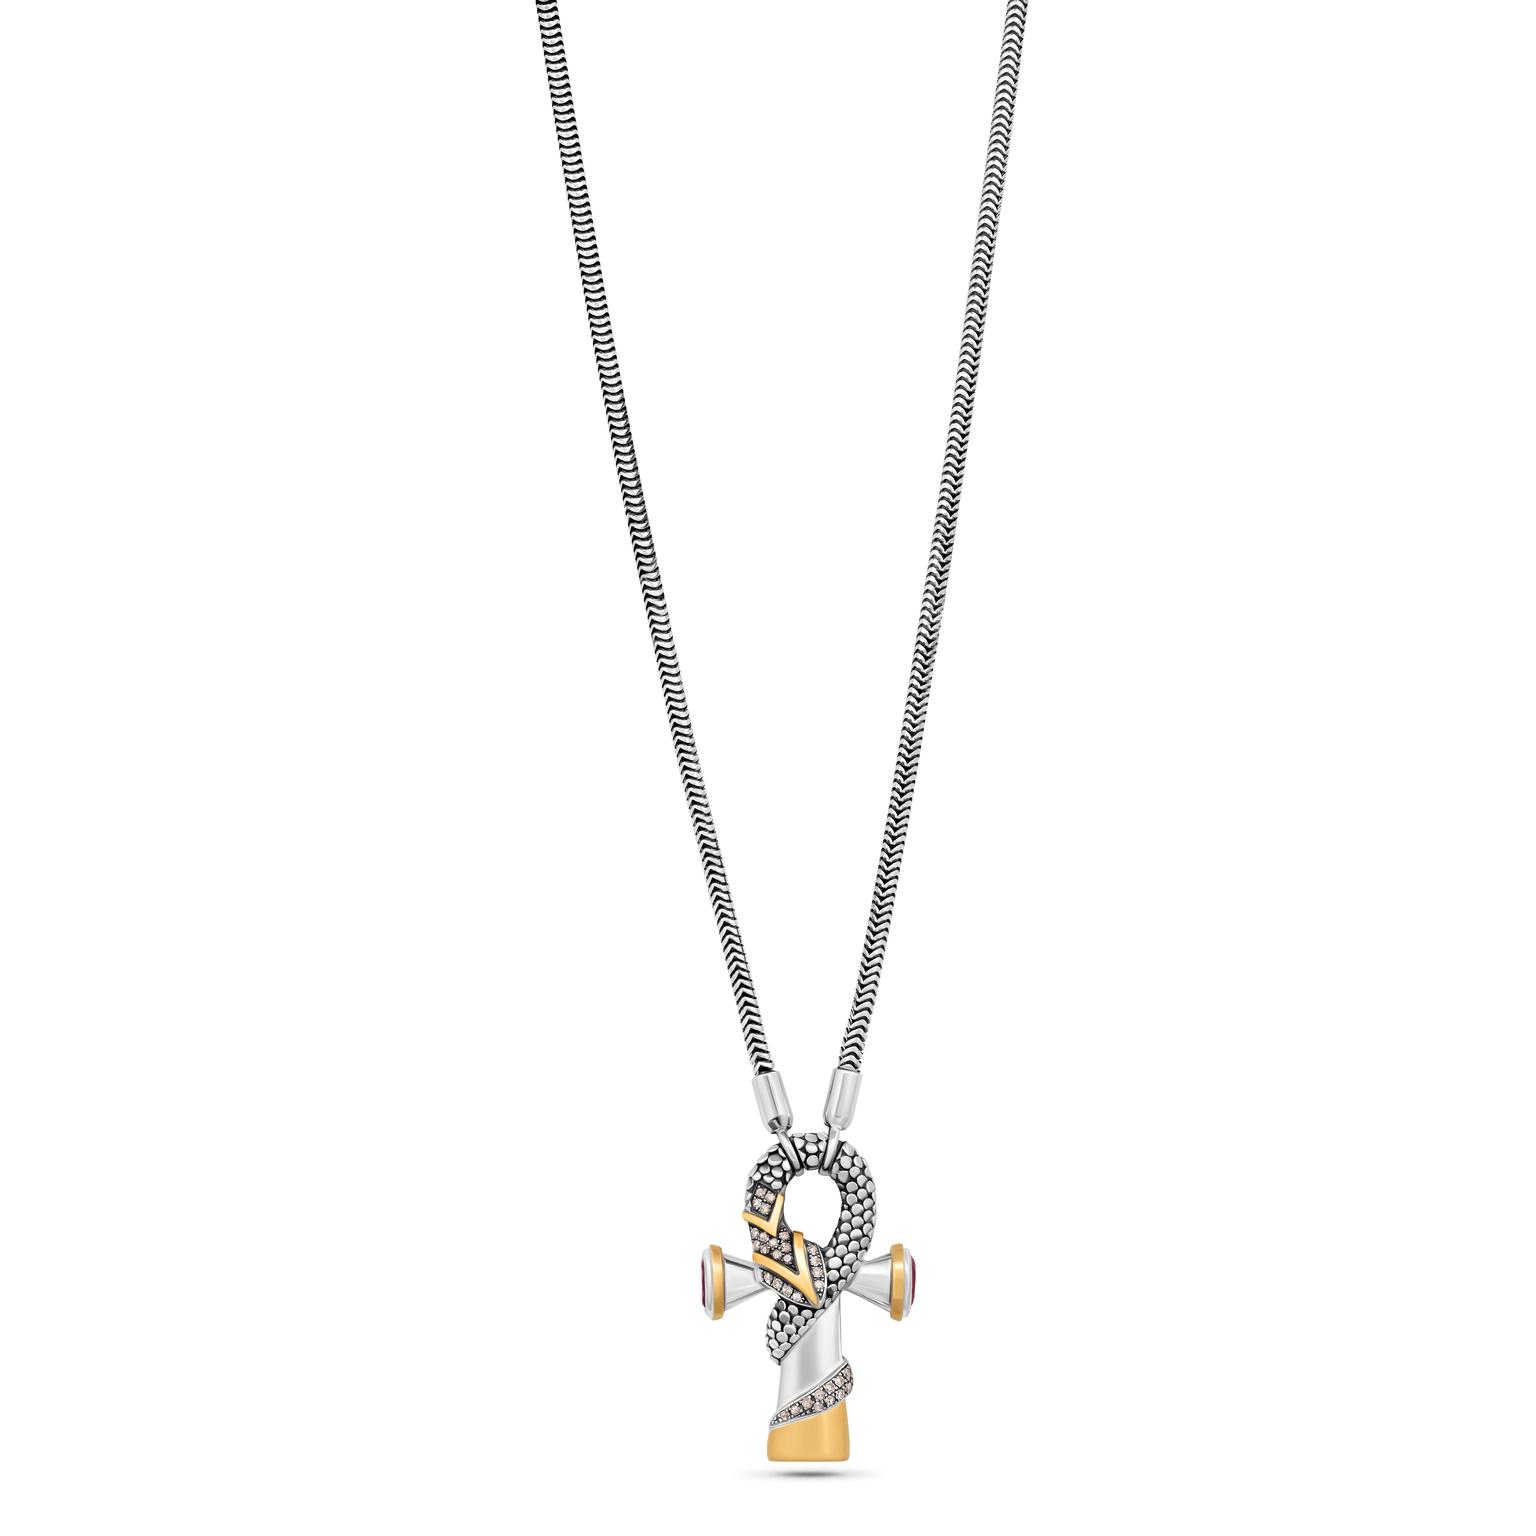 18kt Gold and Sterling silver key of life and snake necklace adorned with semi-precious and precious stones